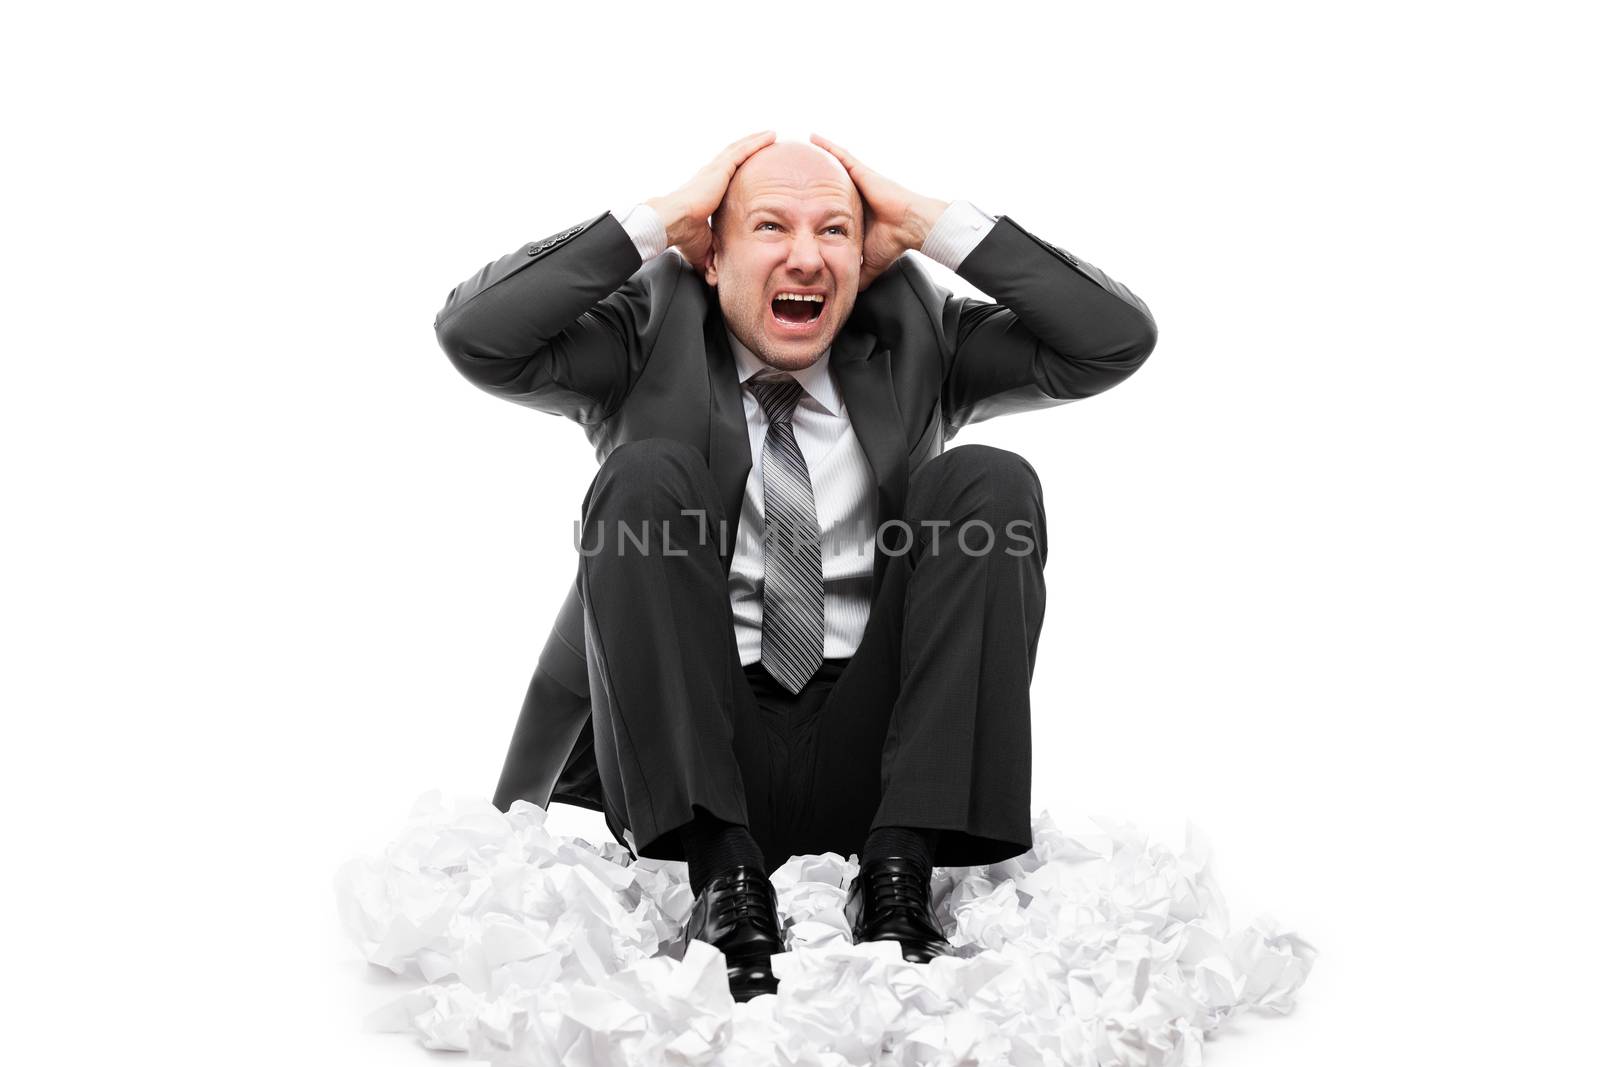 Loud shouting or screaming tired stressed businessman hands covering ears by ia_64